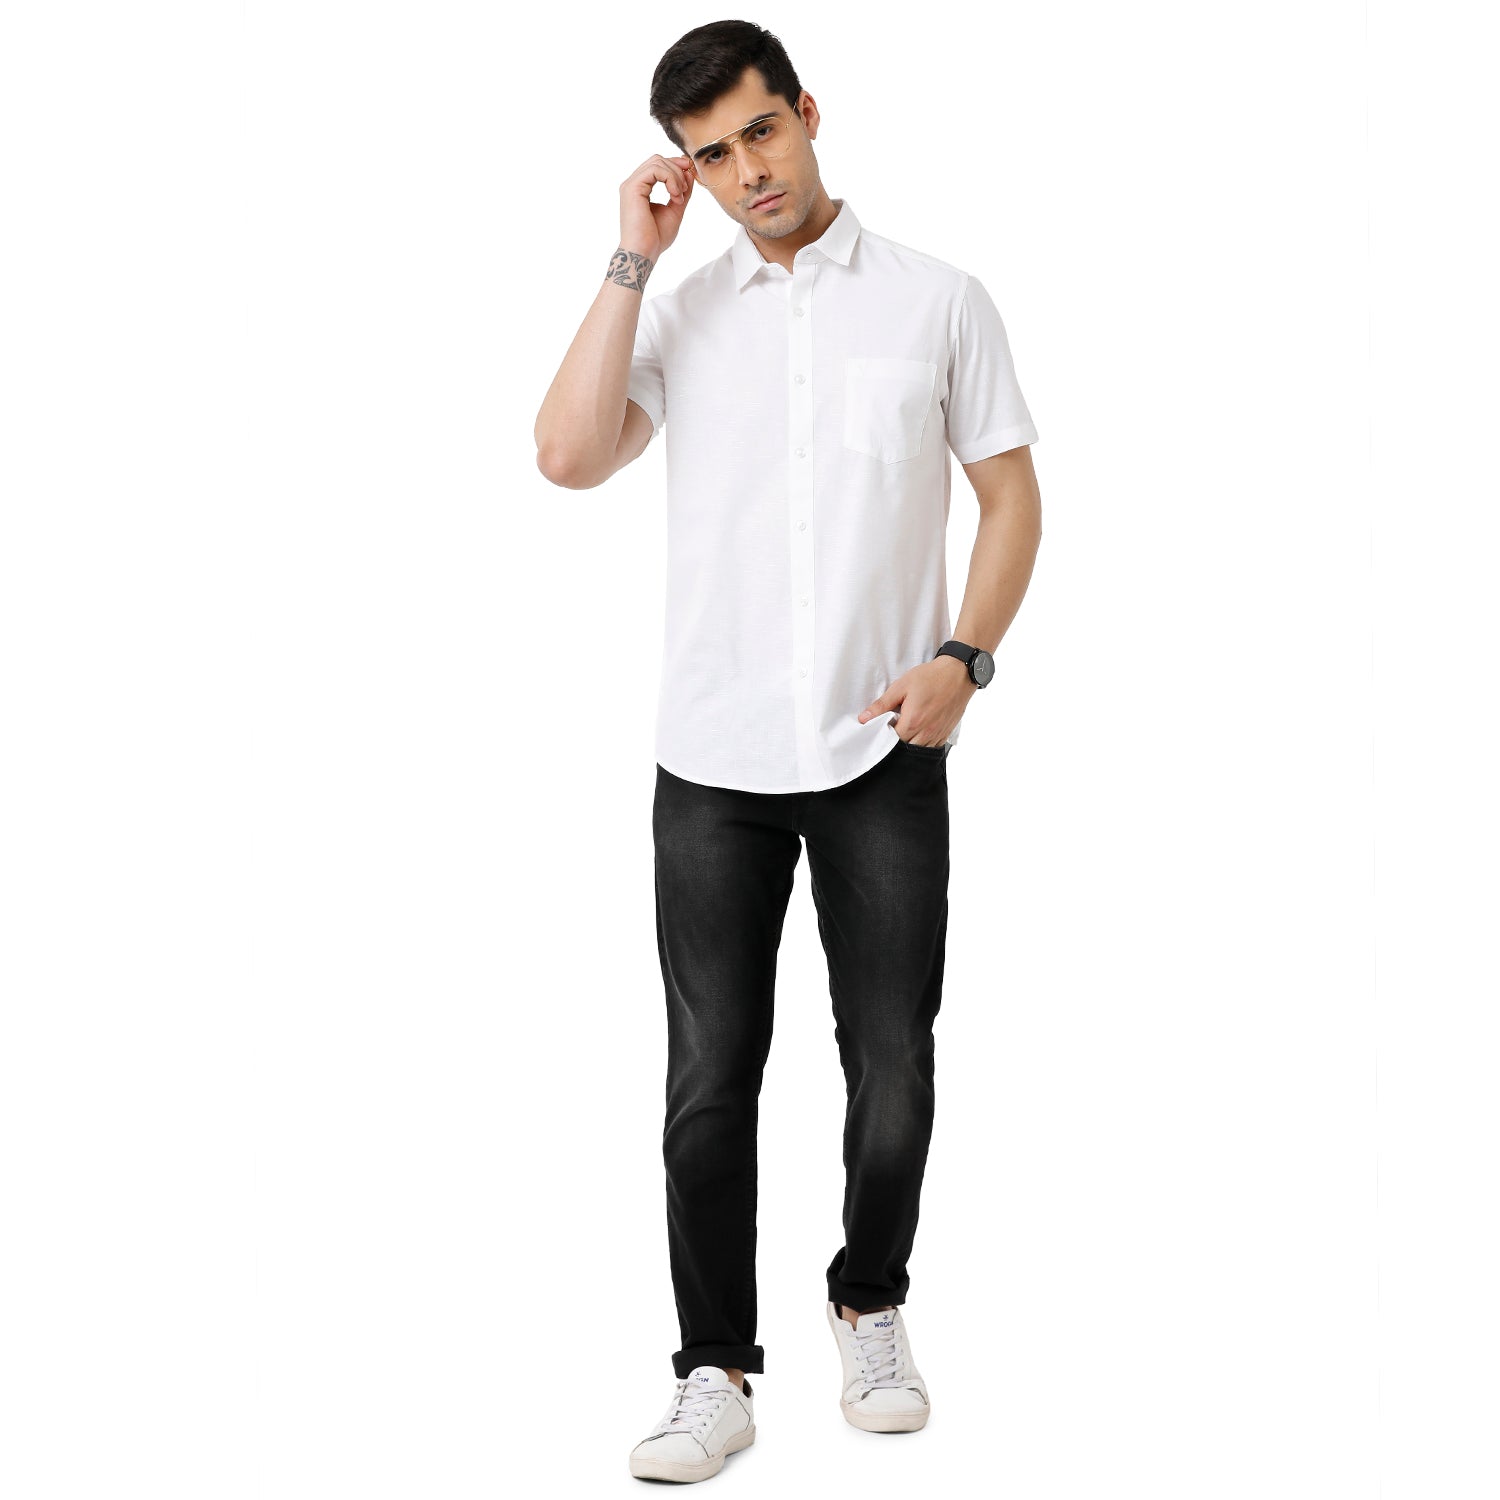 Classic Polo Mens 100% Cotton Solid Slim Fit Half Sleeve White Color Shirt - White-01 Shirts Classic Polo 